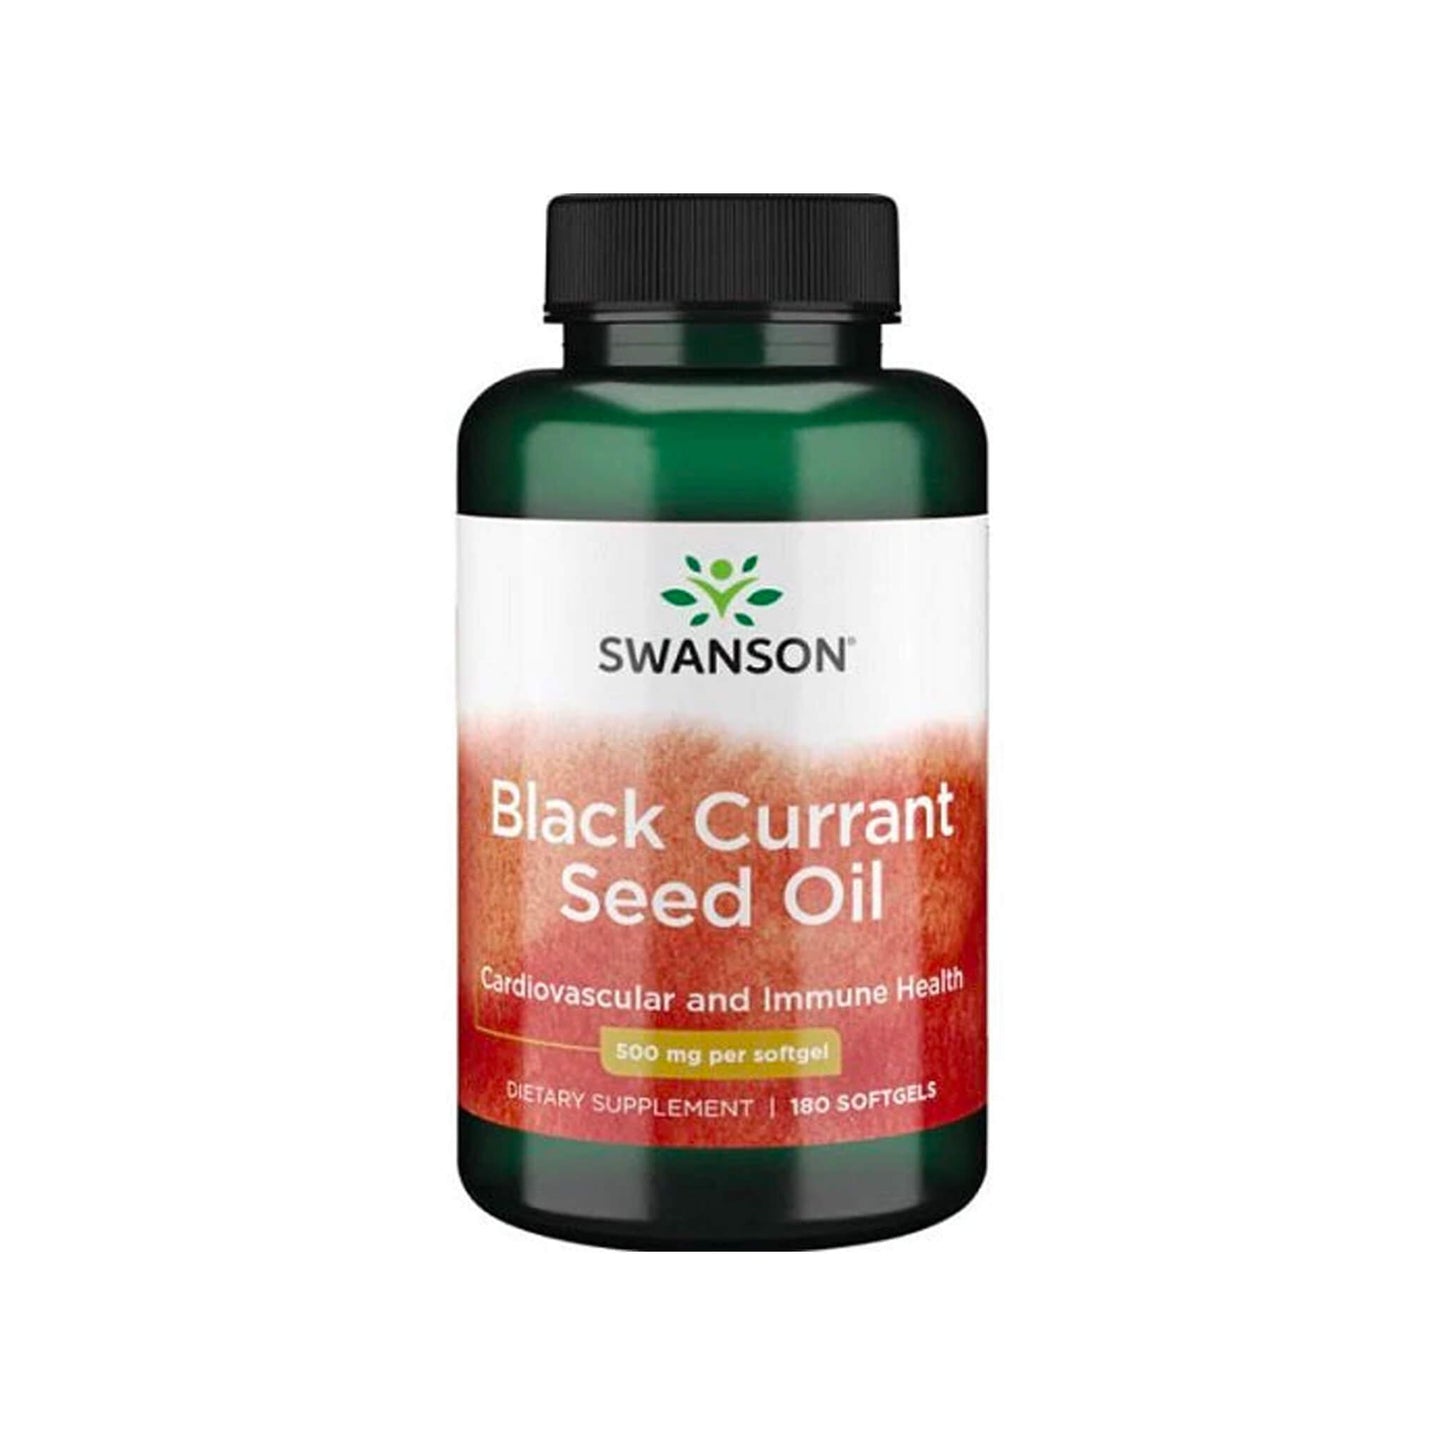 Swanson Black Currant Seed Oil, 500mg - 180 Soft Gels